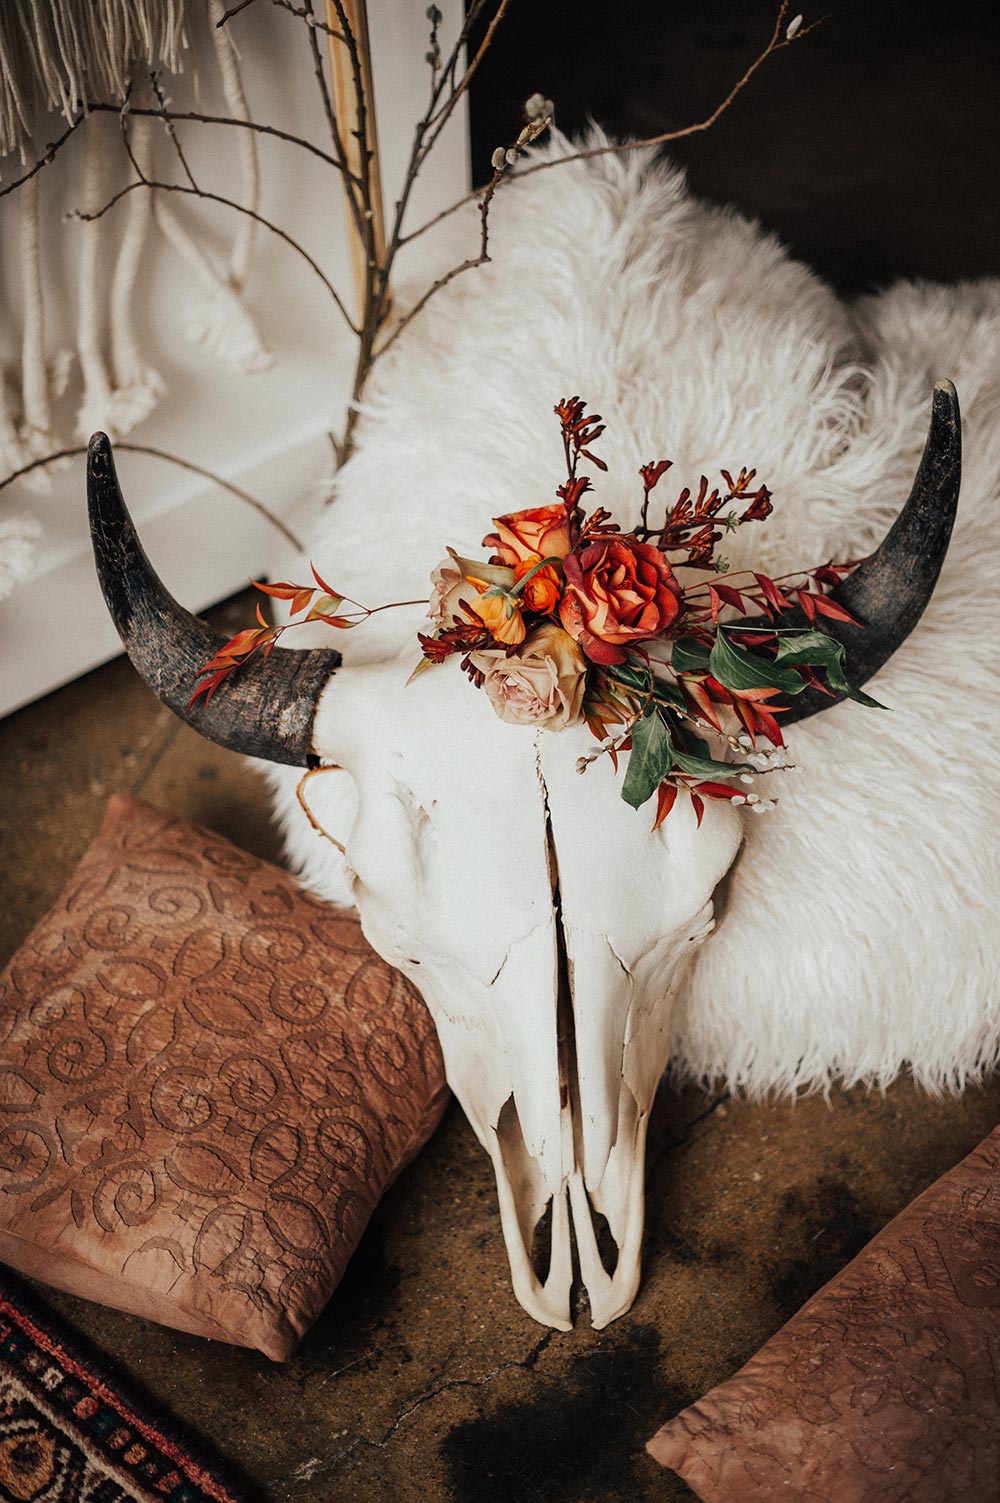 Bohemian Elopement Inspiration with Oxblood and Persimmon Hues ⋆ Ruffled